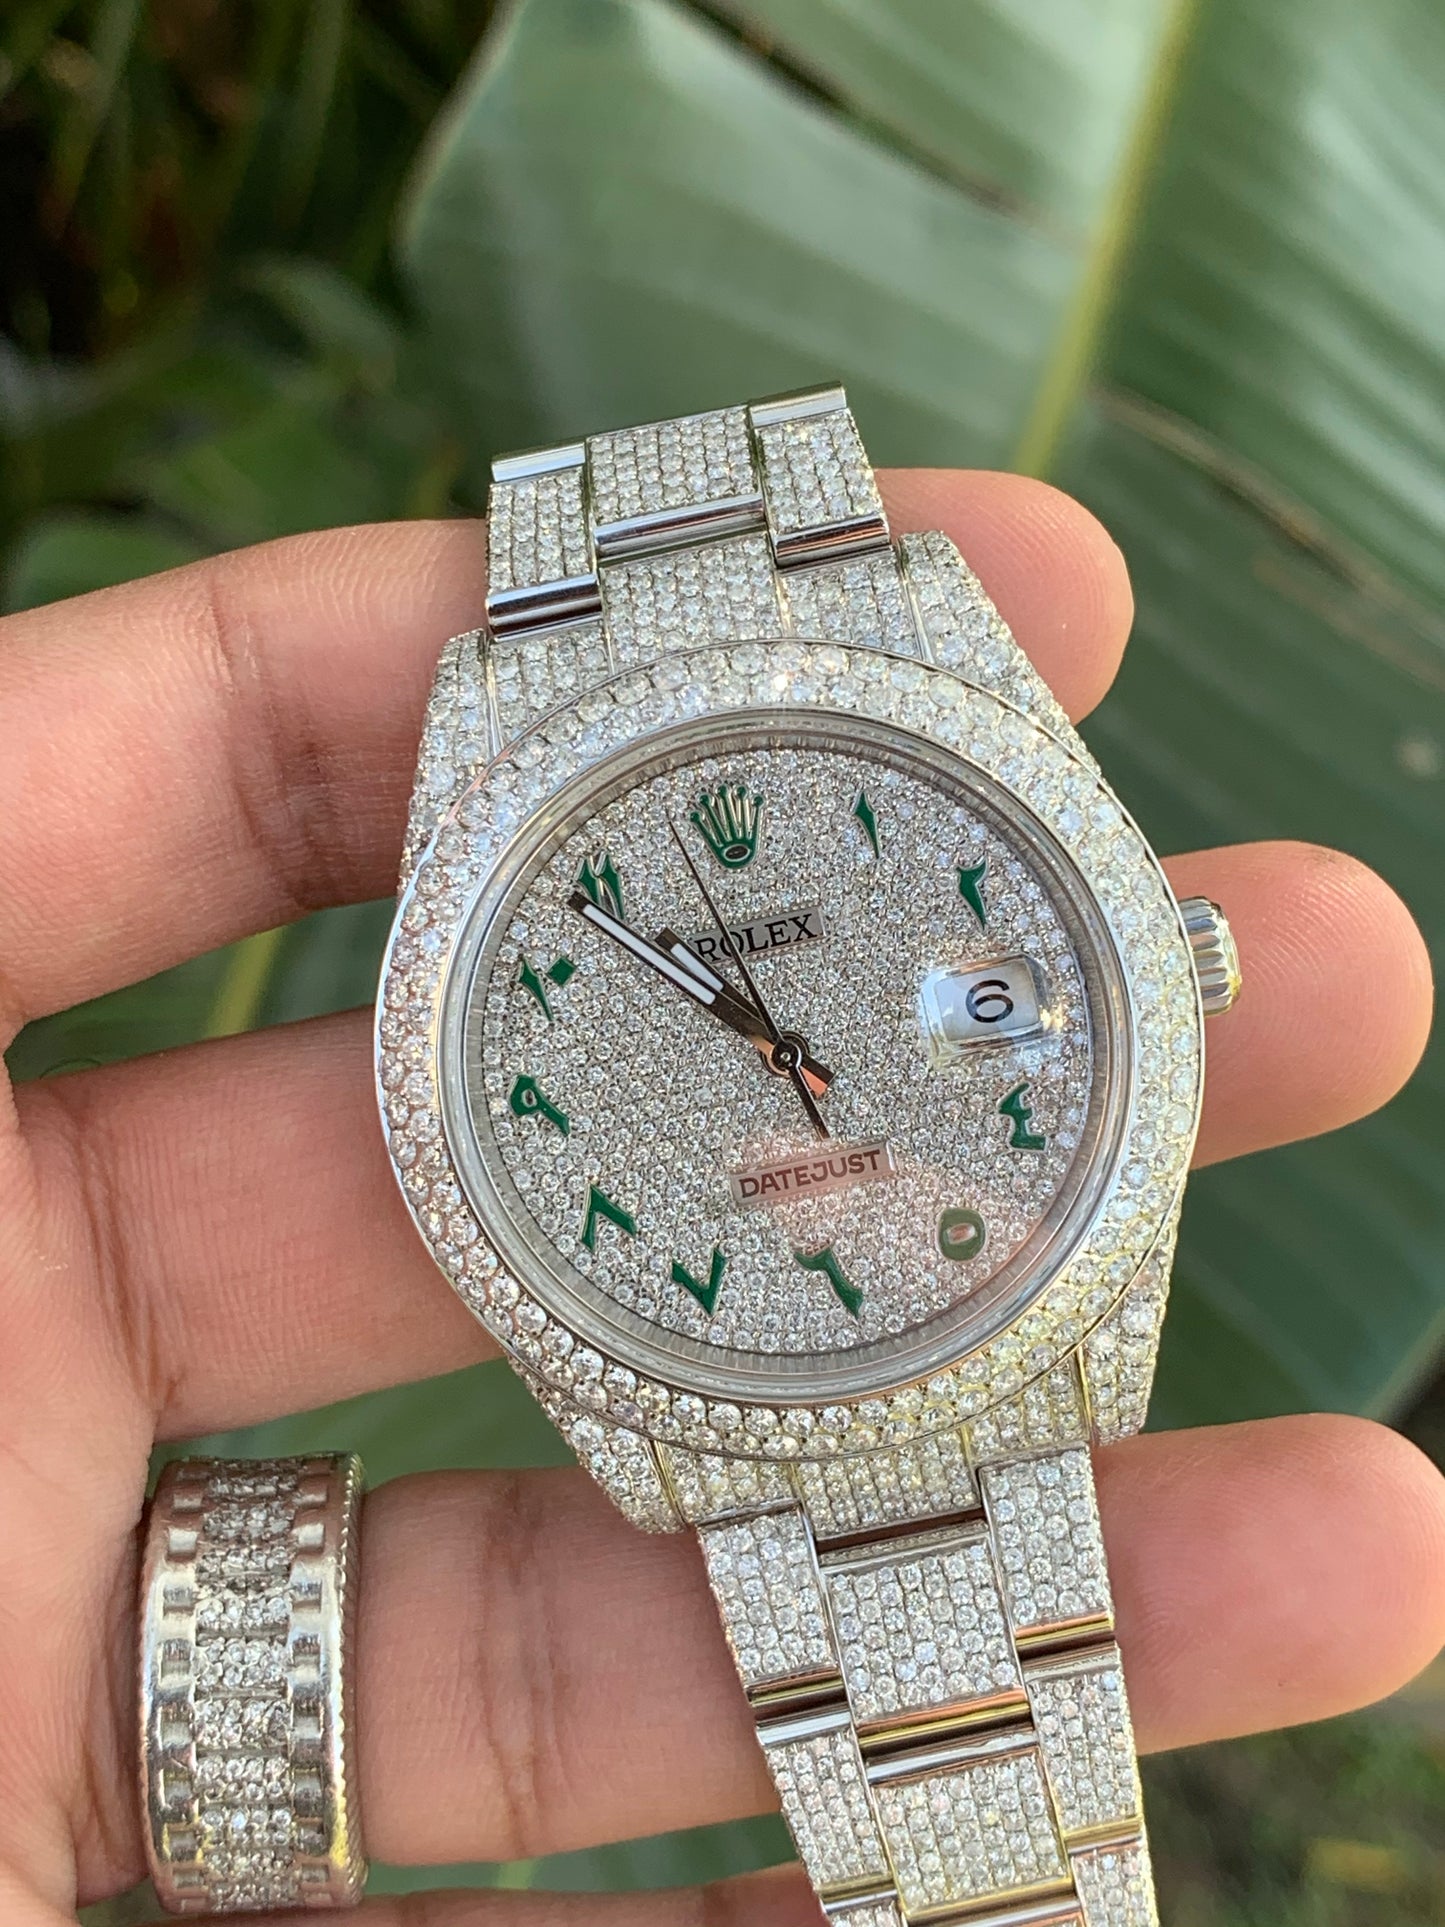 Rolex Iced Out Datejust 41 With Rainbow Bezel Reference126300 - Youarrived